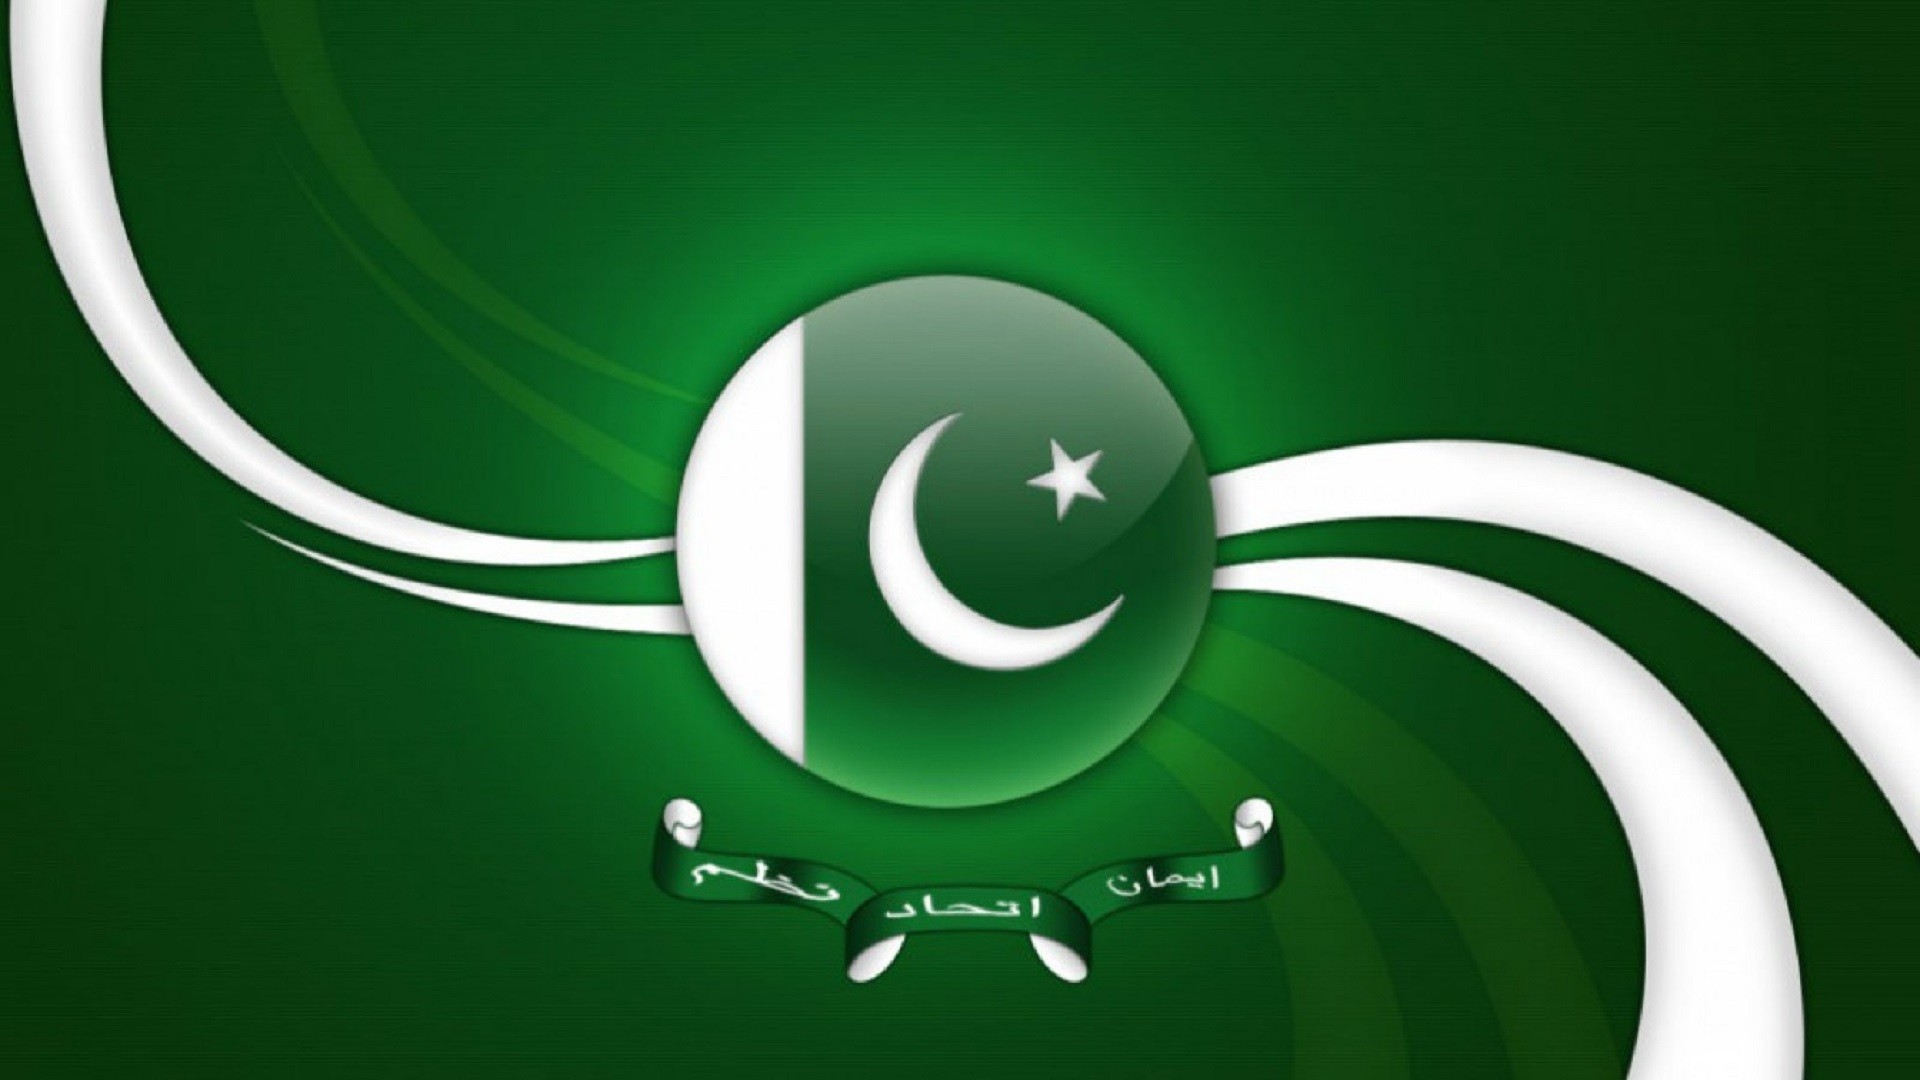 Pakistan Flag Wallpapers HD 2018 (66+ pictures)